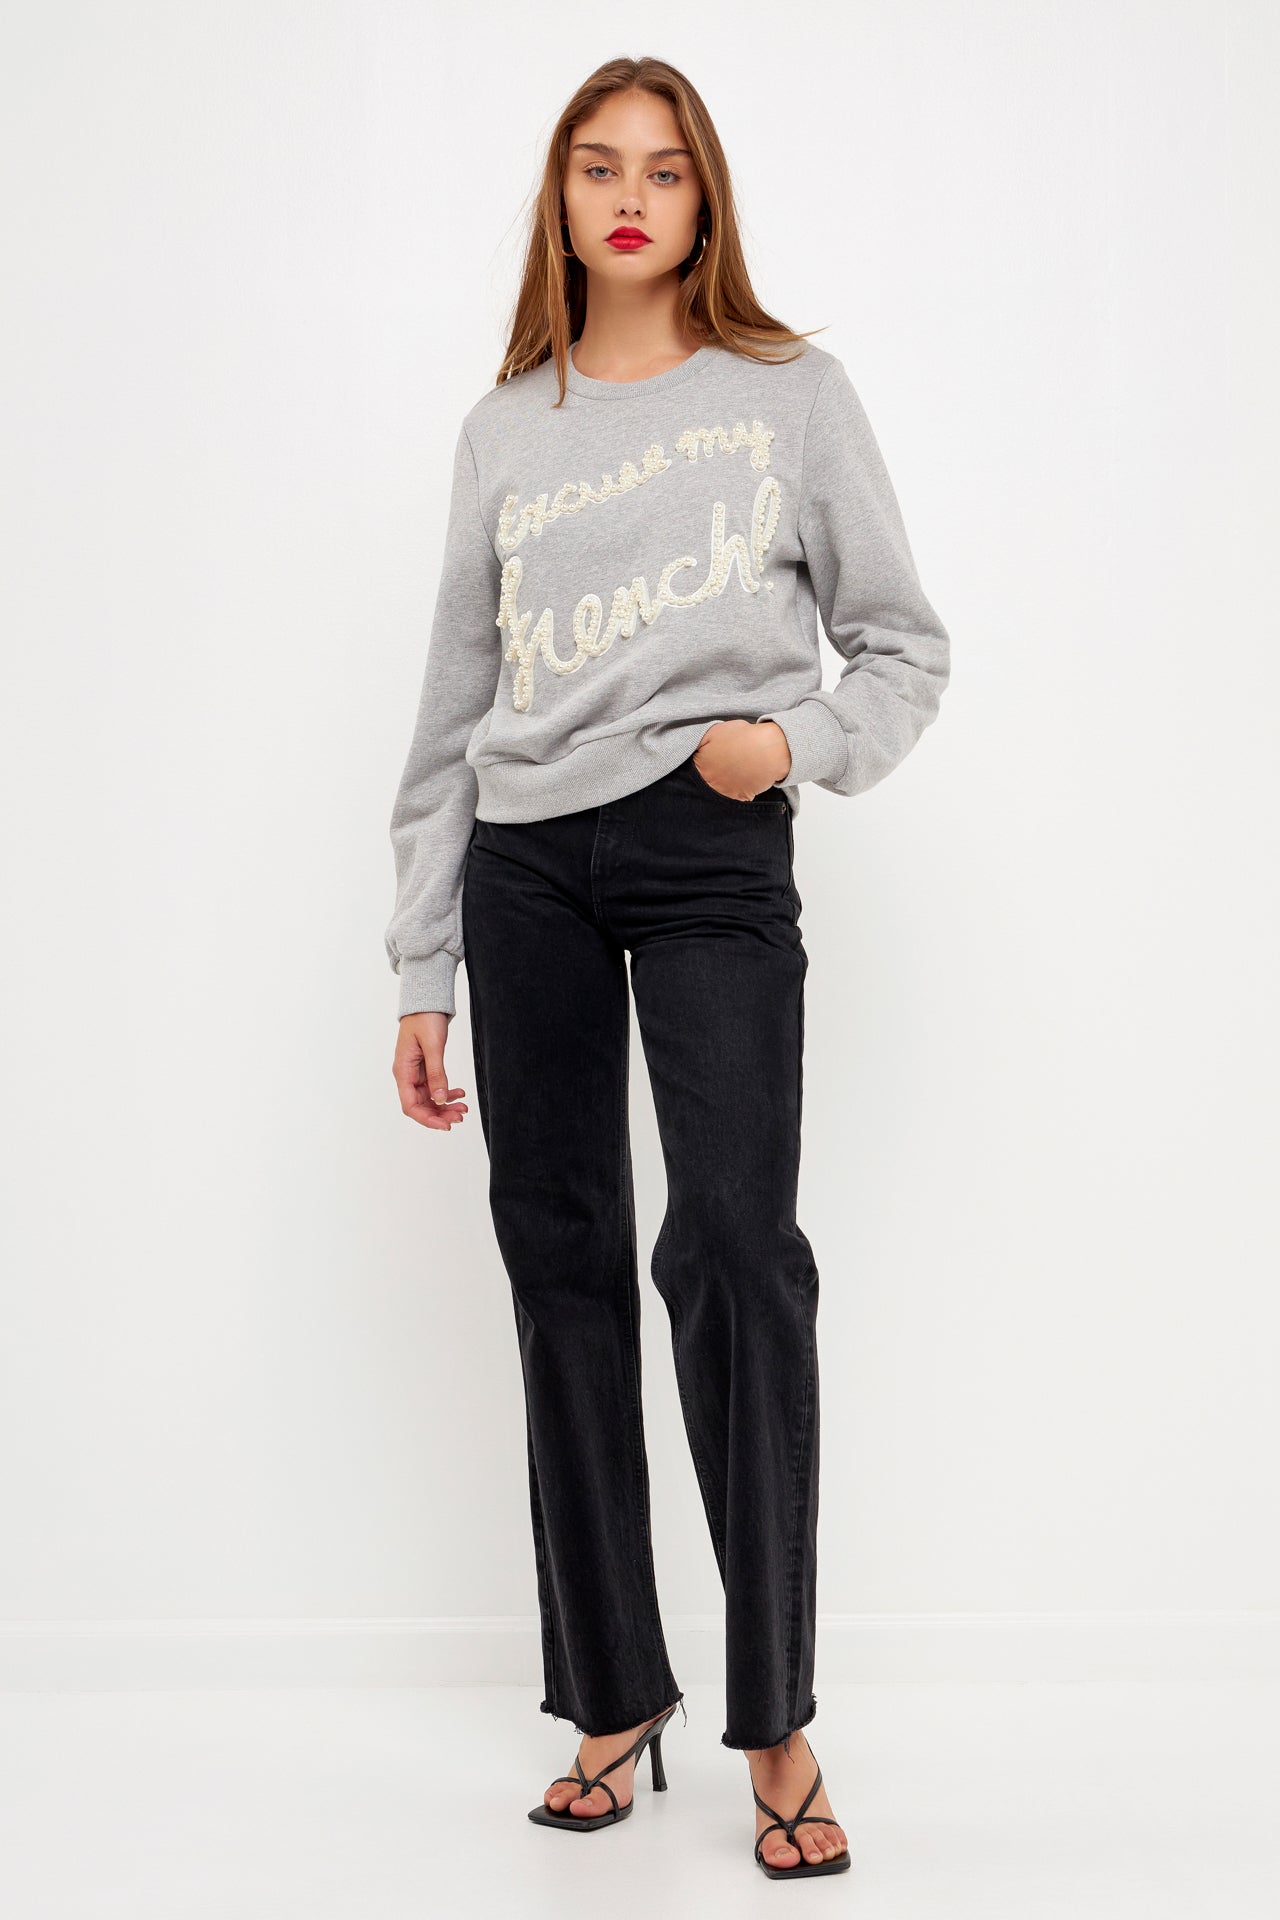 SALE OF Pearl Excuse My French Sweatshirt